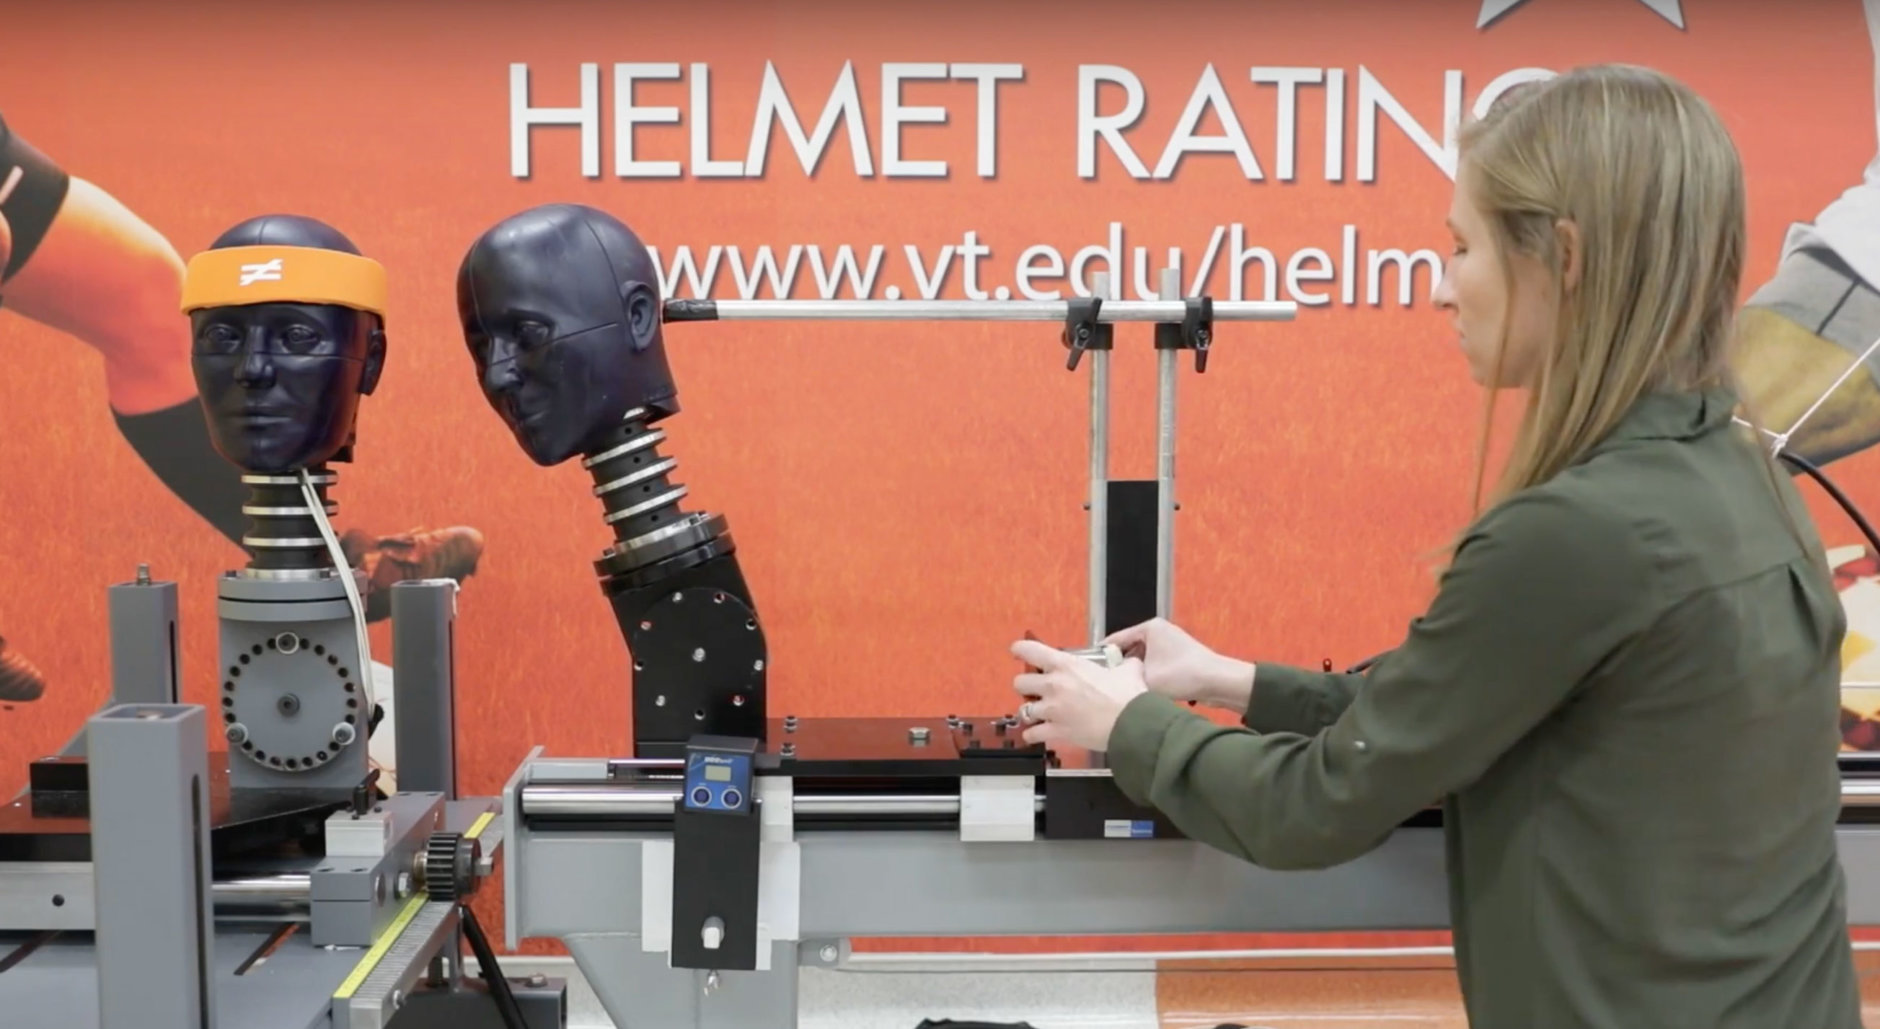 An impact simulator used in the study mimicked two players’ heads colliding at three different impact speeds and two impact locations. The test dummy heads are pictured with Abi Tyson, Virginia Tech Helmet Lab research associate. (Courtesy Virginia Tech)